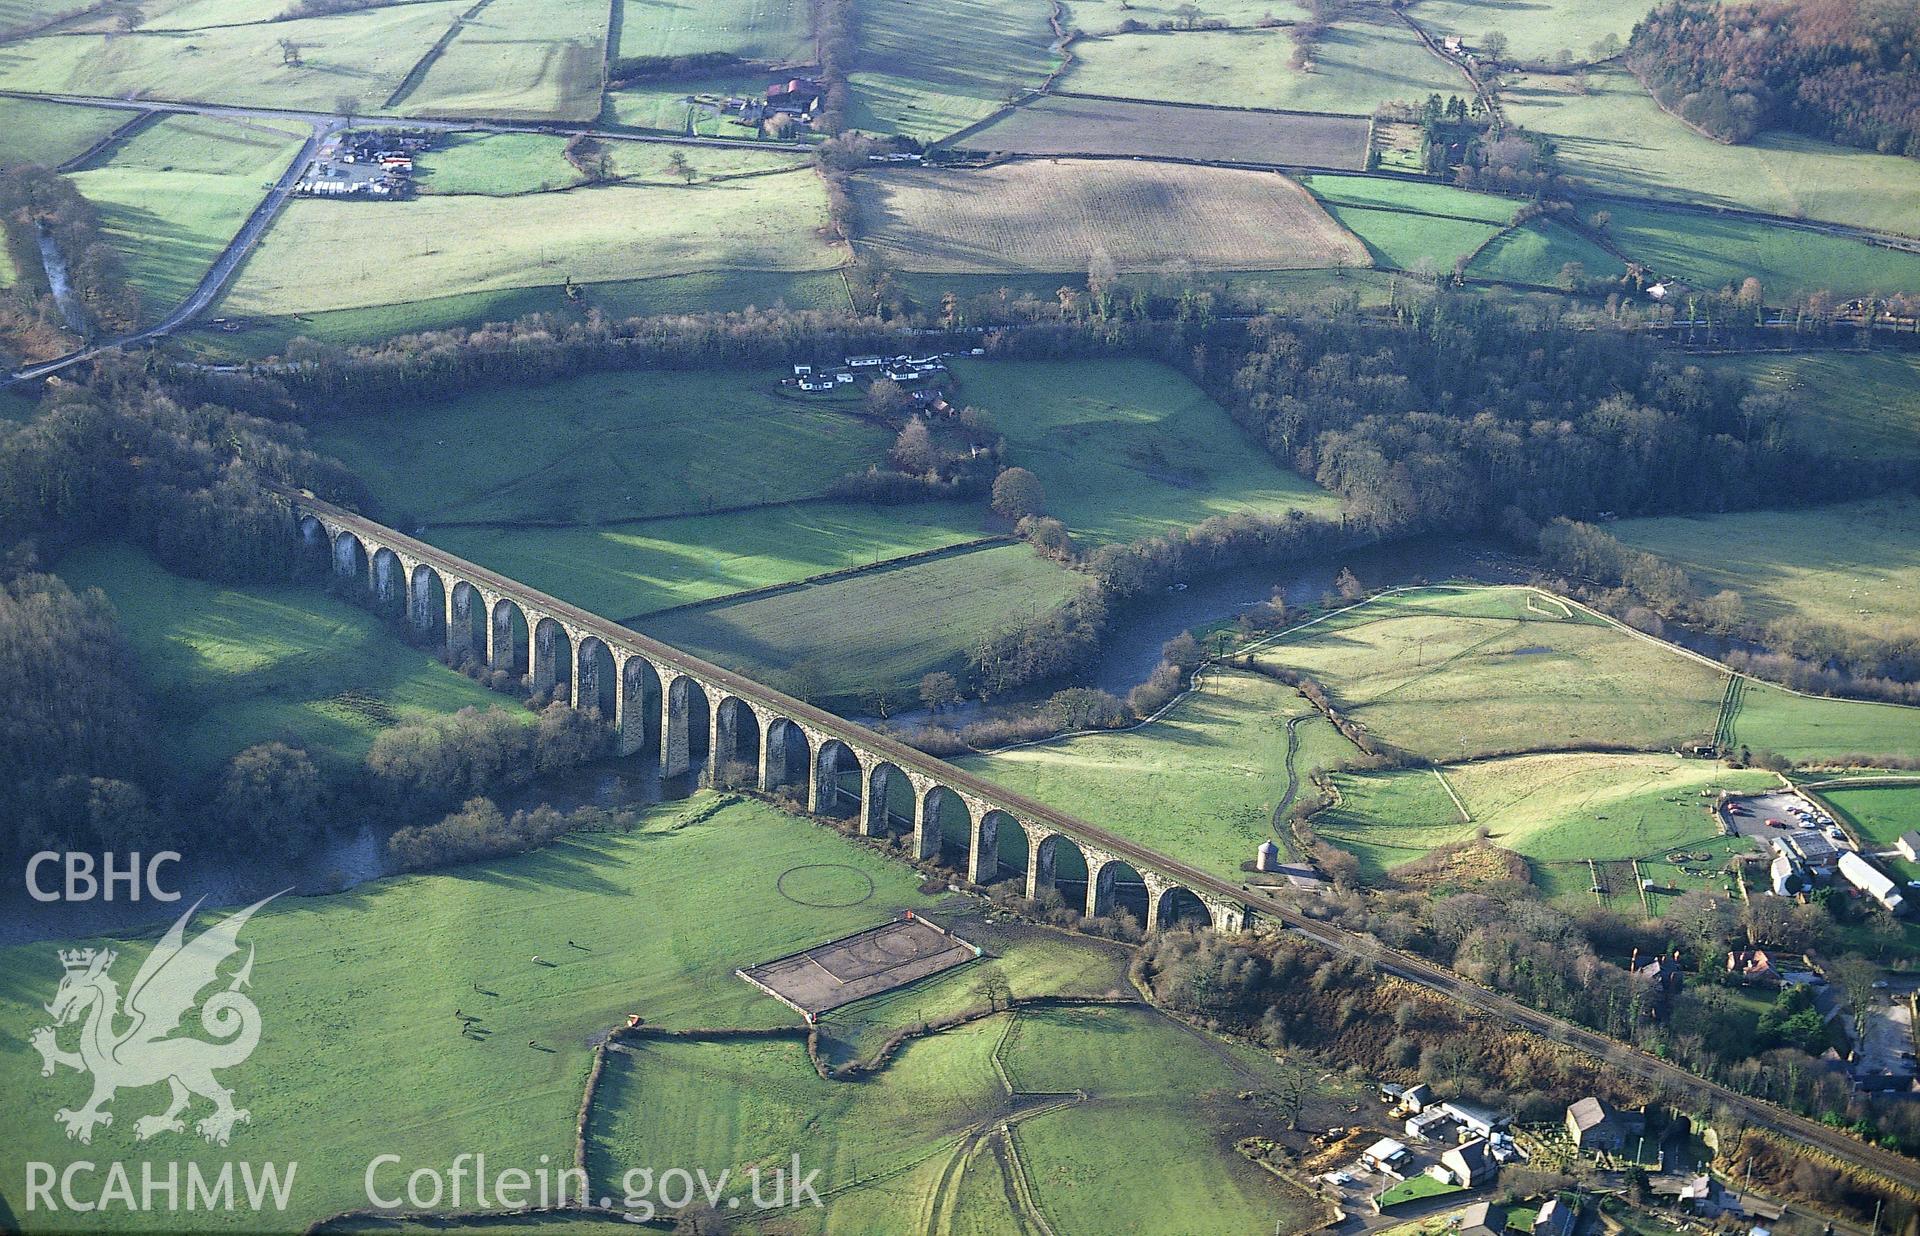 RCAHMW colour slide oblique aerial photograph of Cefn Bychan Viaduct, Chirk;Cefn, taken by C.R. Musson, 23/01/94